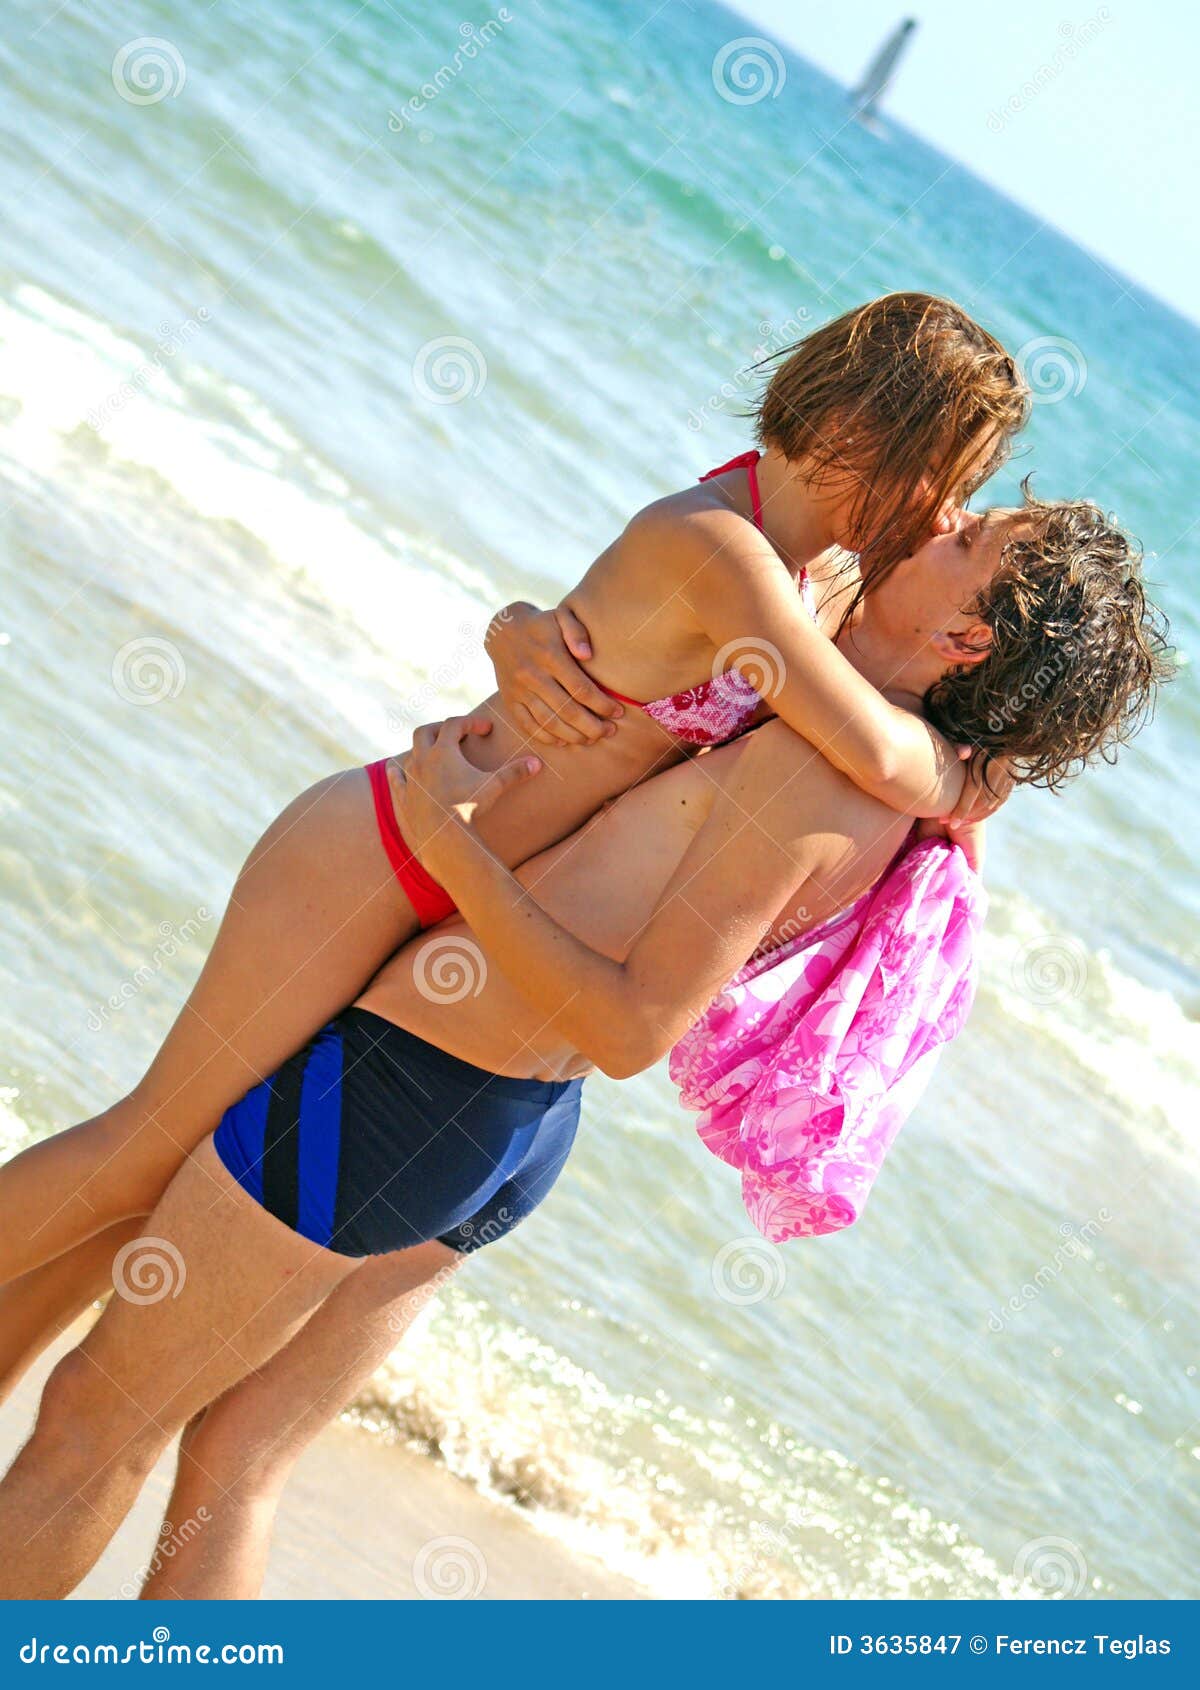 april drewry recommends kissing on the beach pic